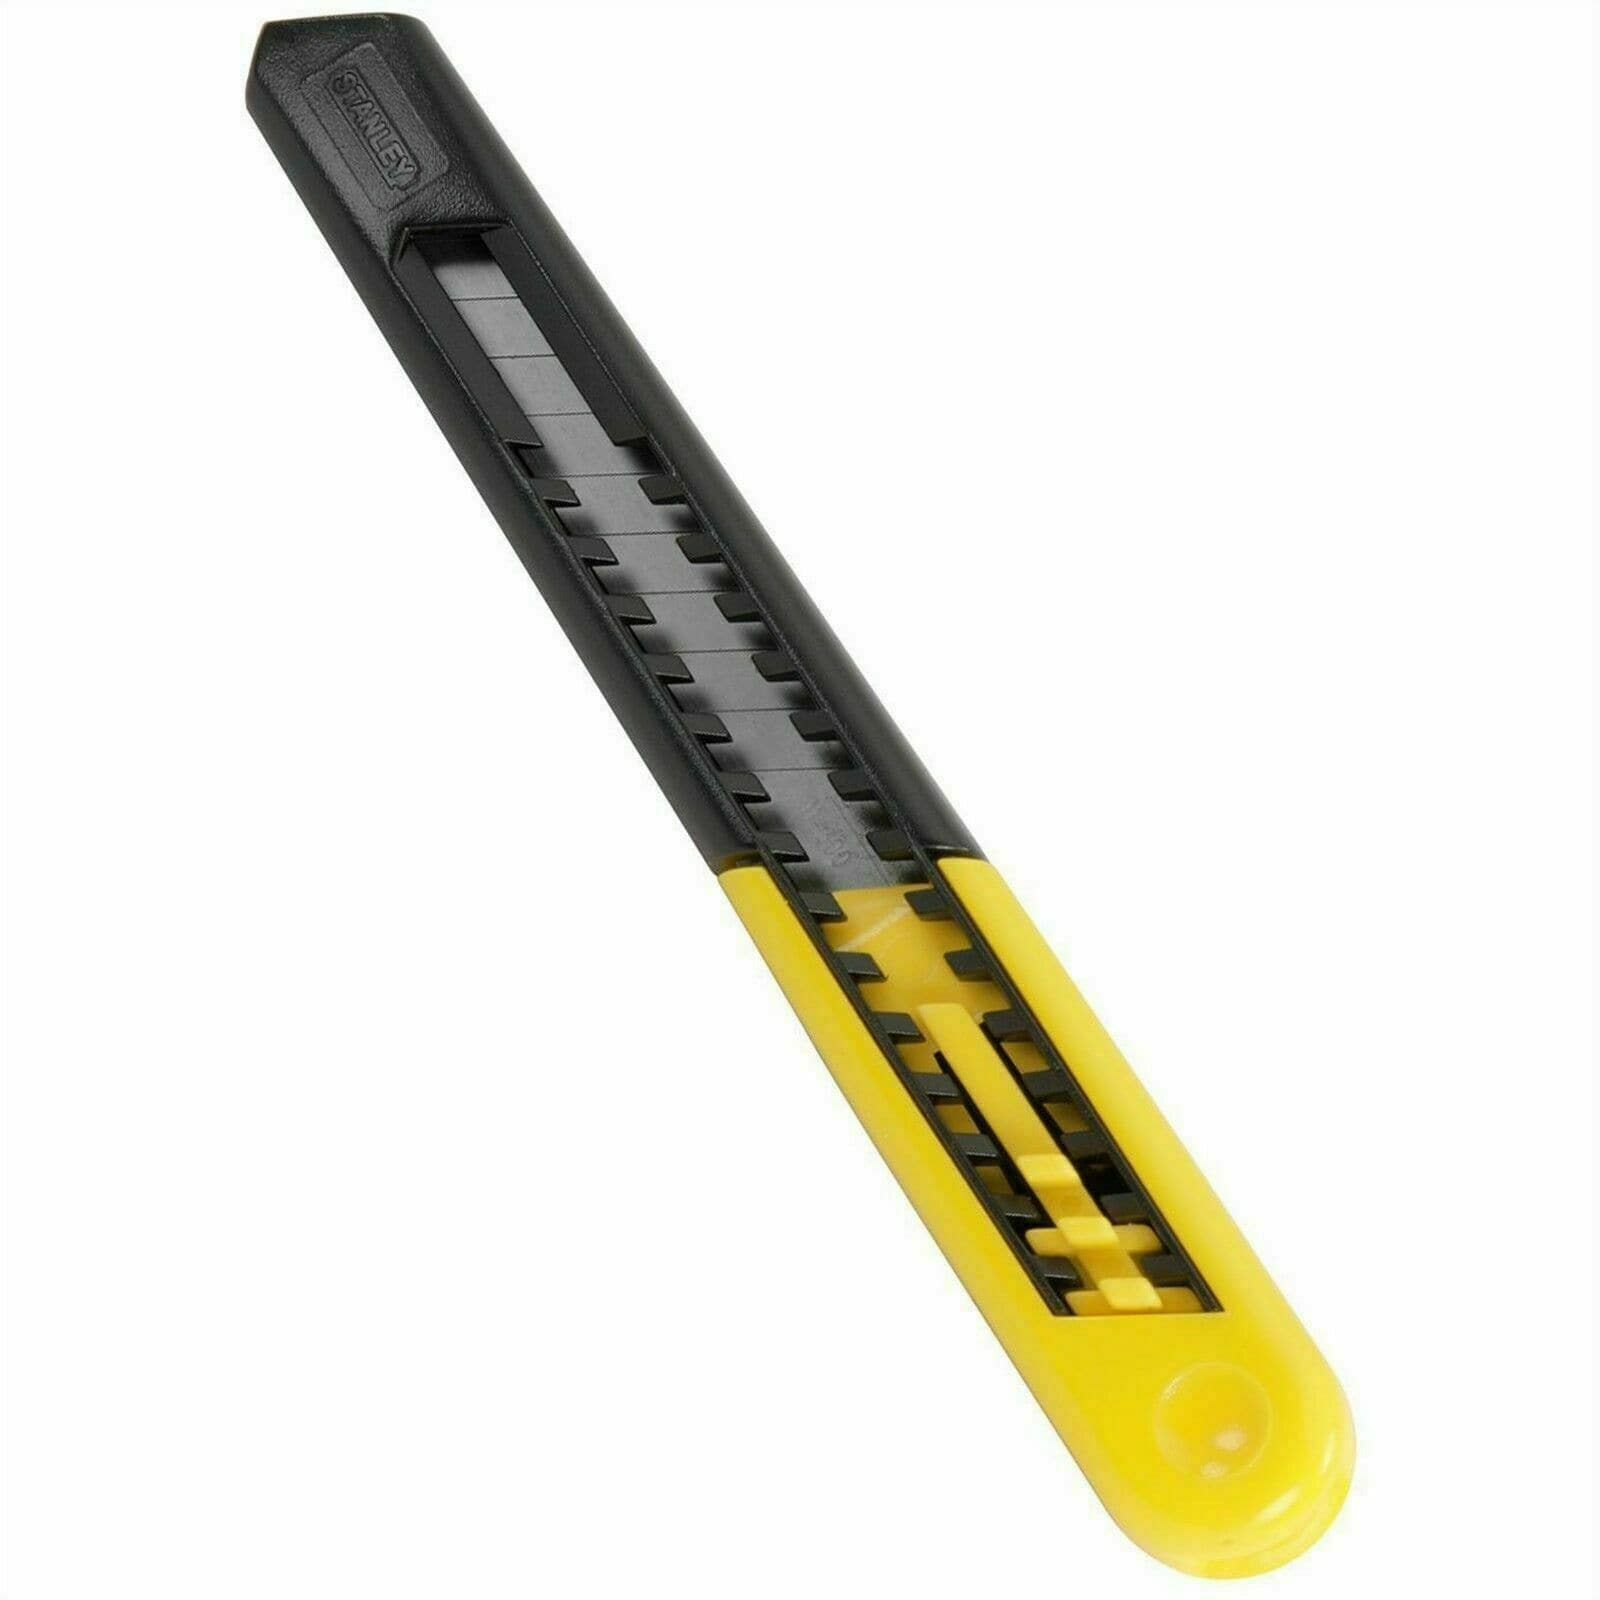 STANLEY 9mm Light-duty Retractable Knife with Snap-off Blades 010150 - Double Bay Hardware